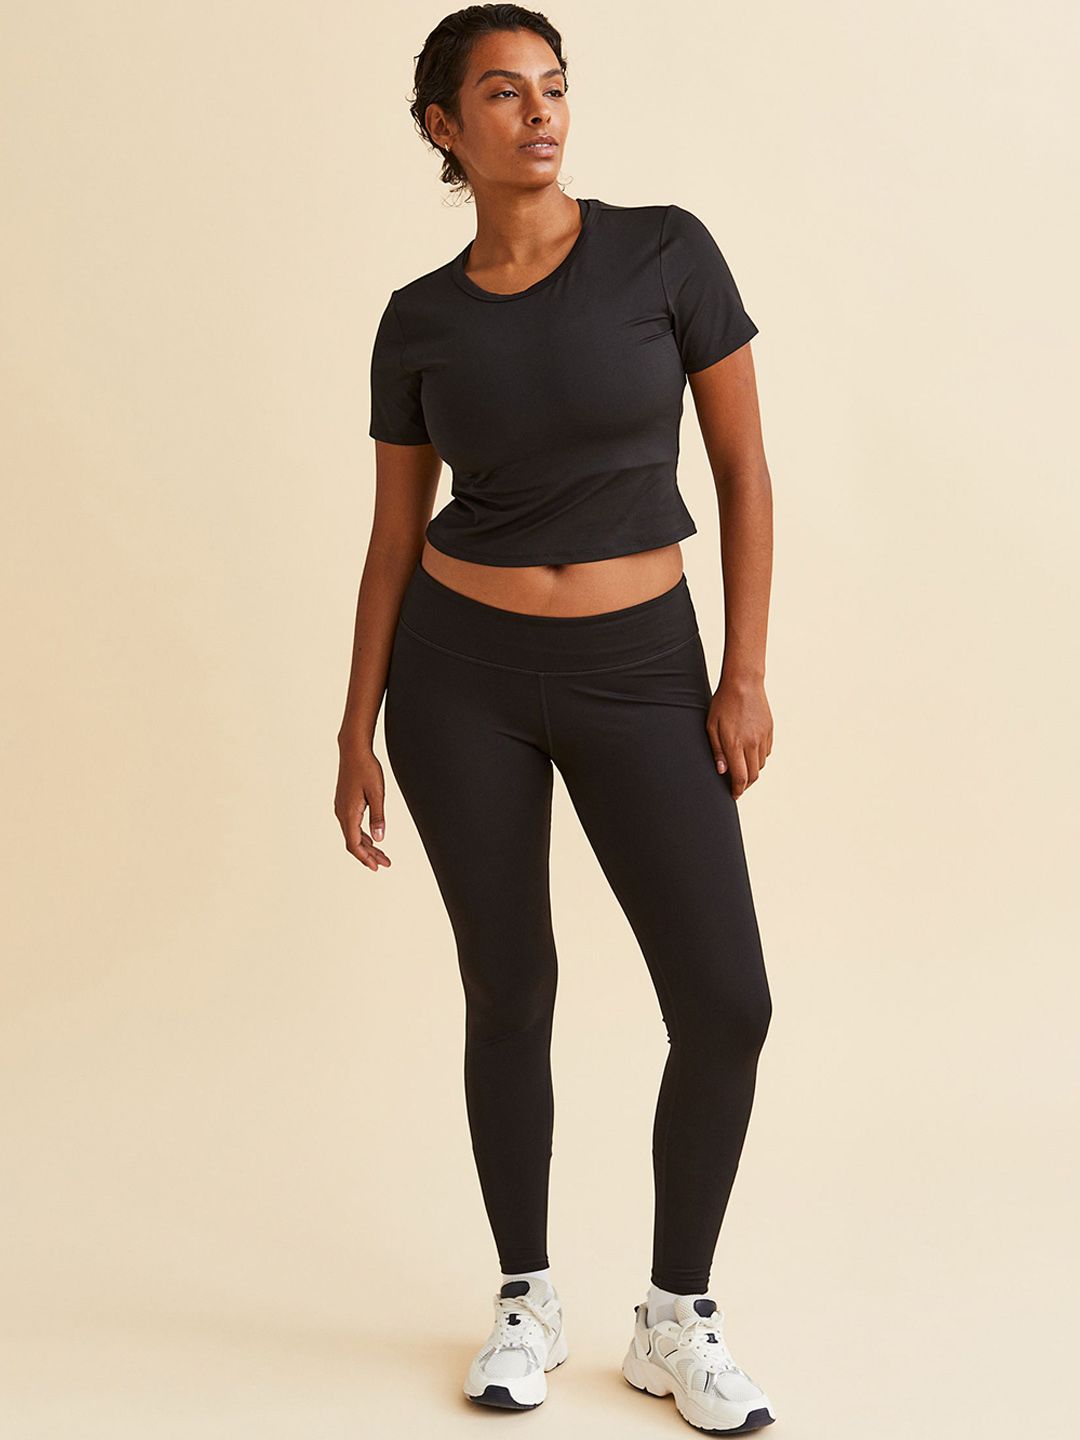 H&M Women Black Low Waist Sports Tights Price in India